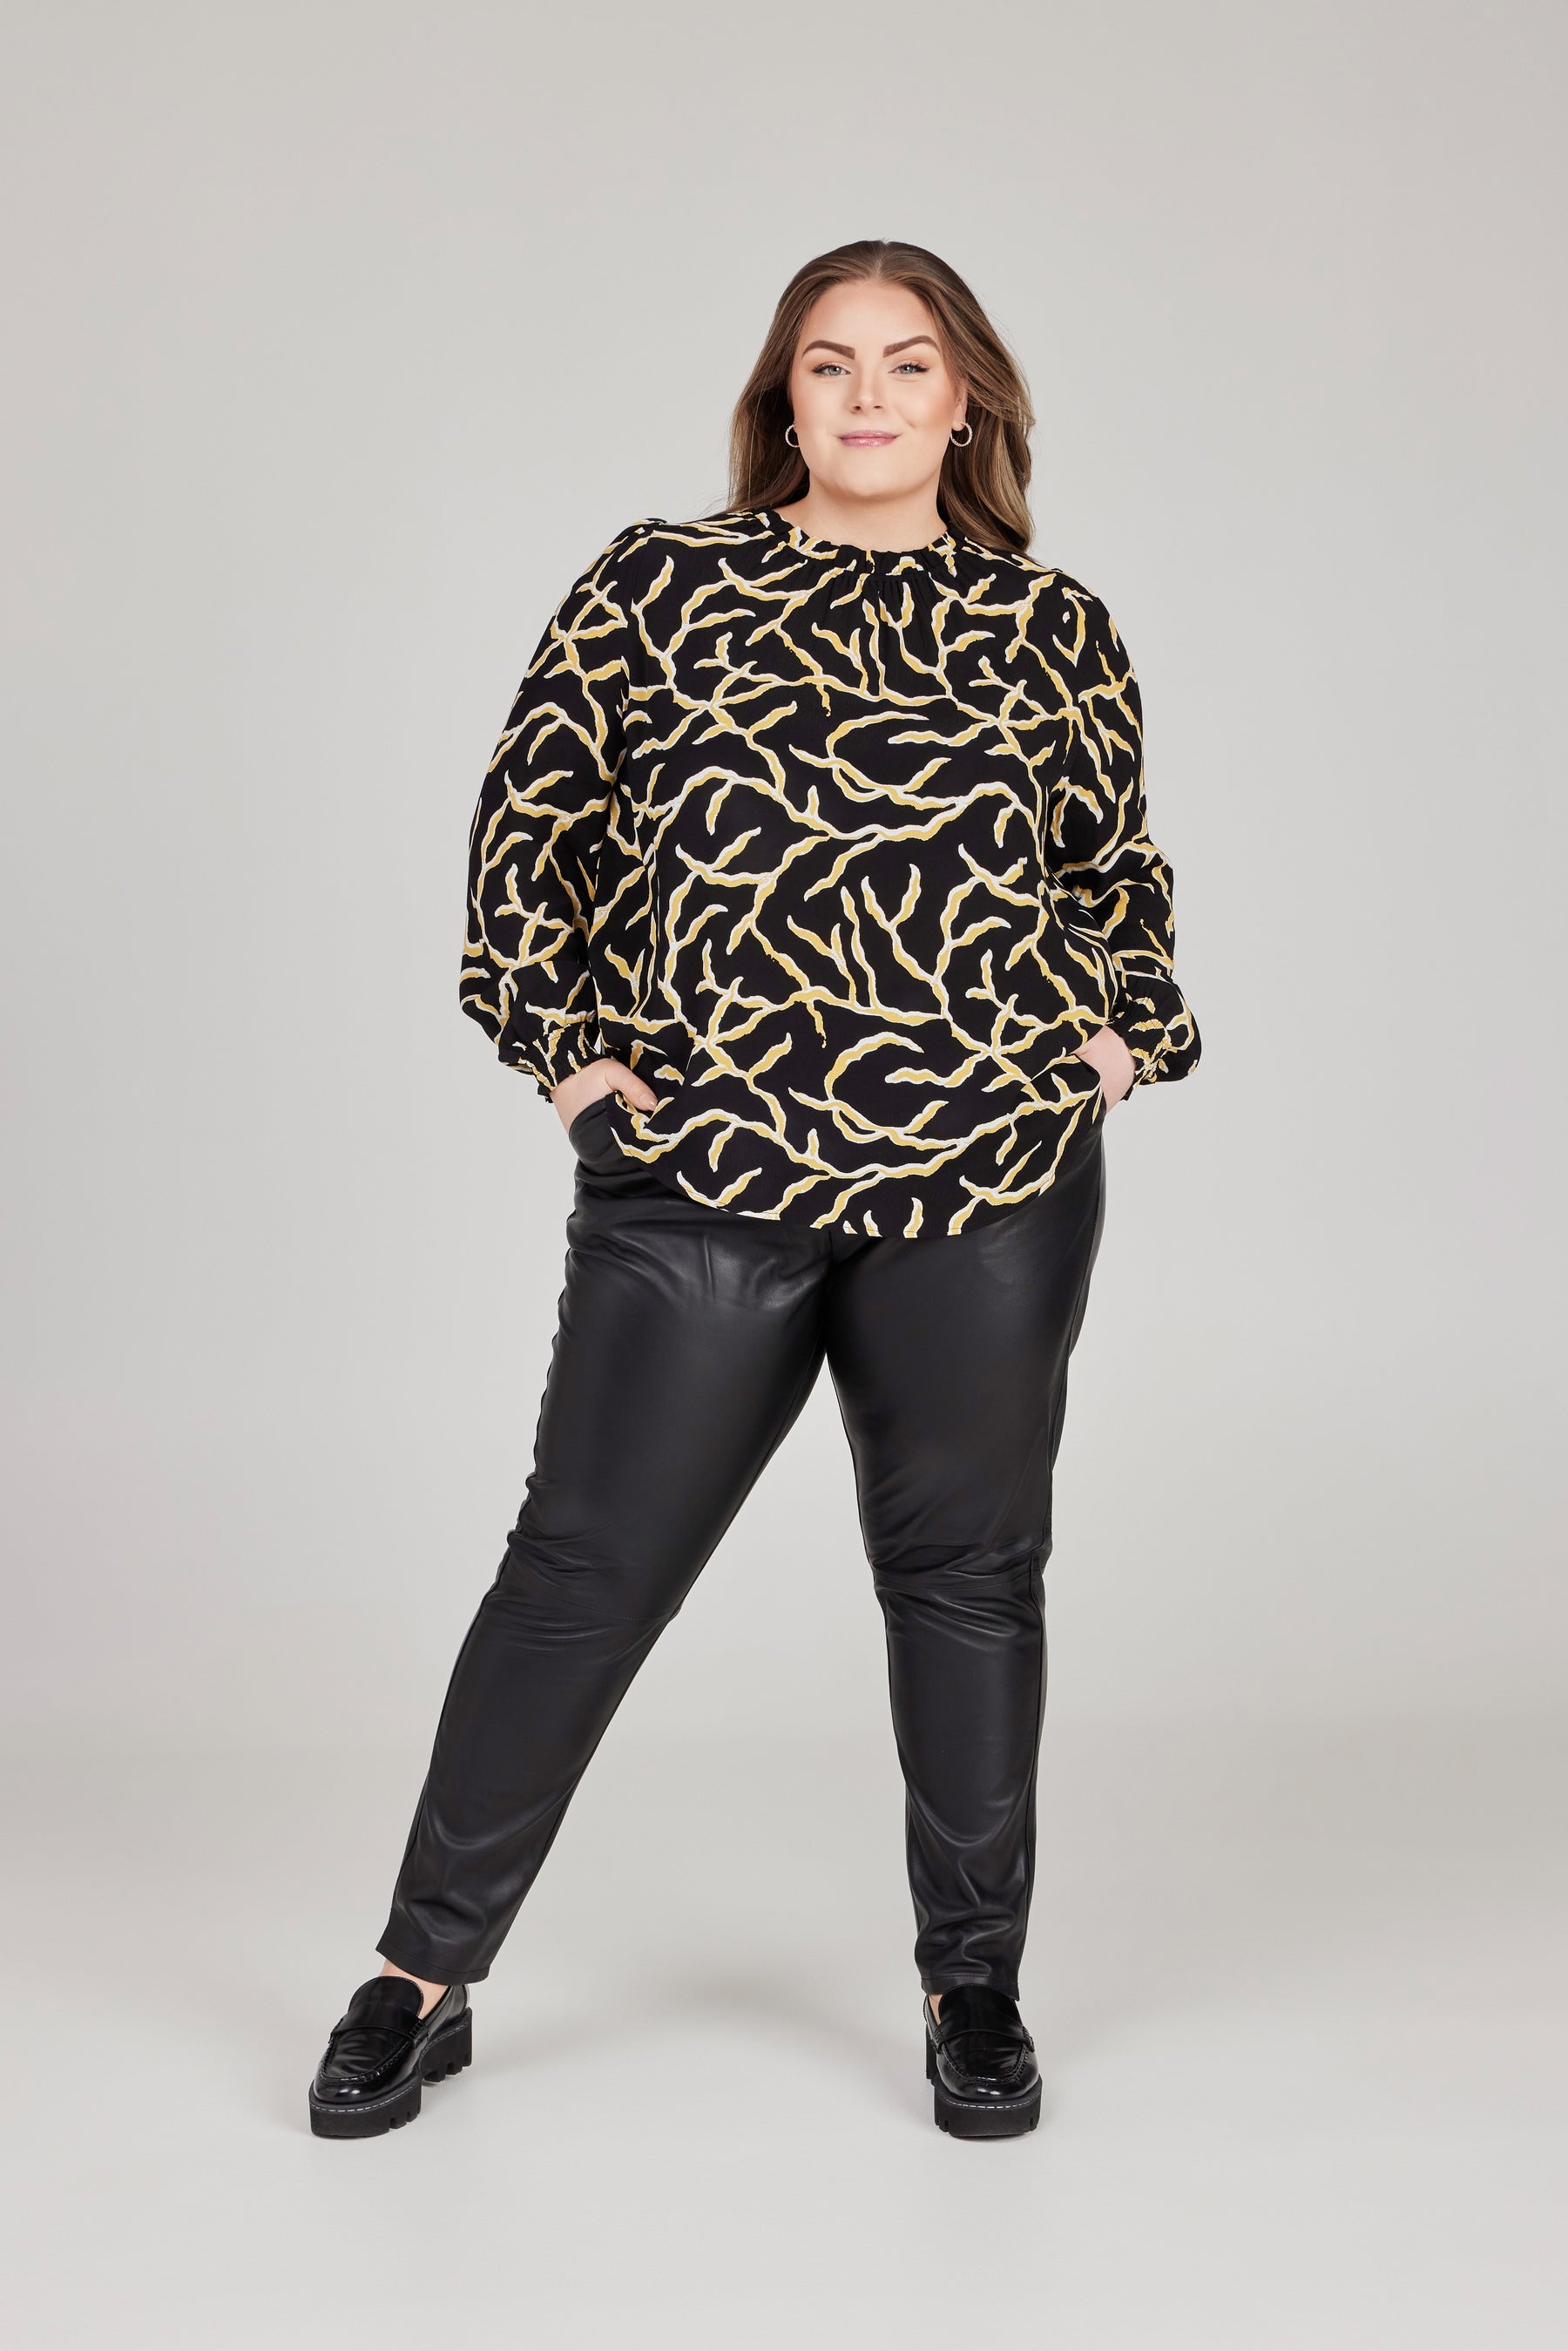 NO. 1 BY OX Bluse med print Bluser Black w Yellow Branches